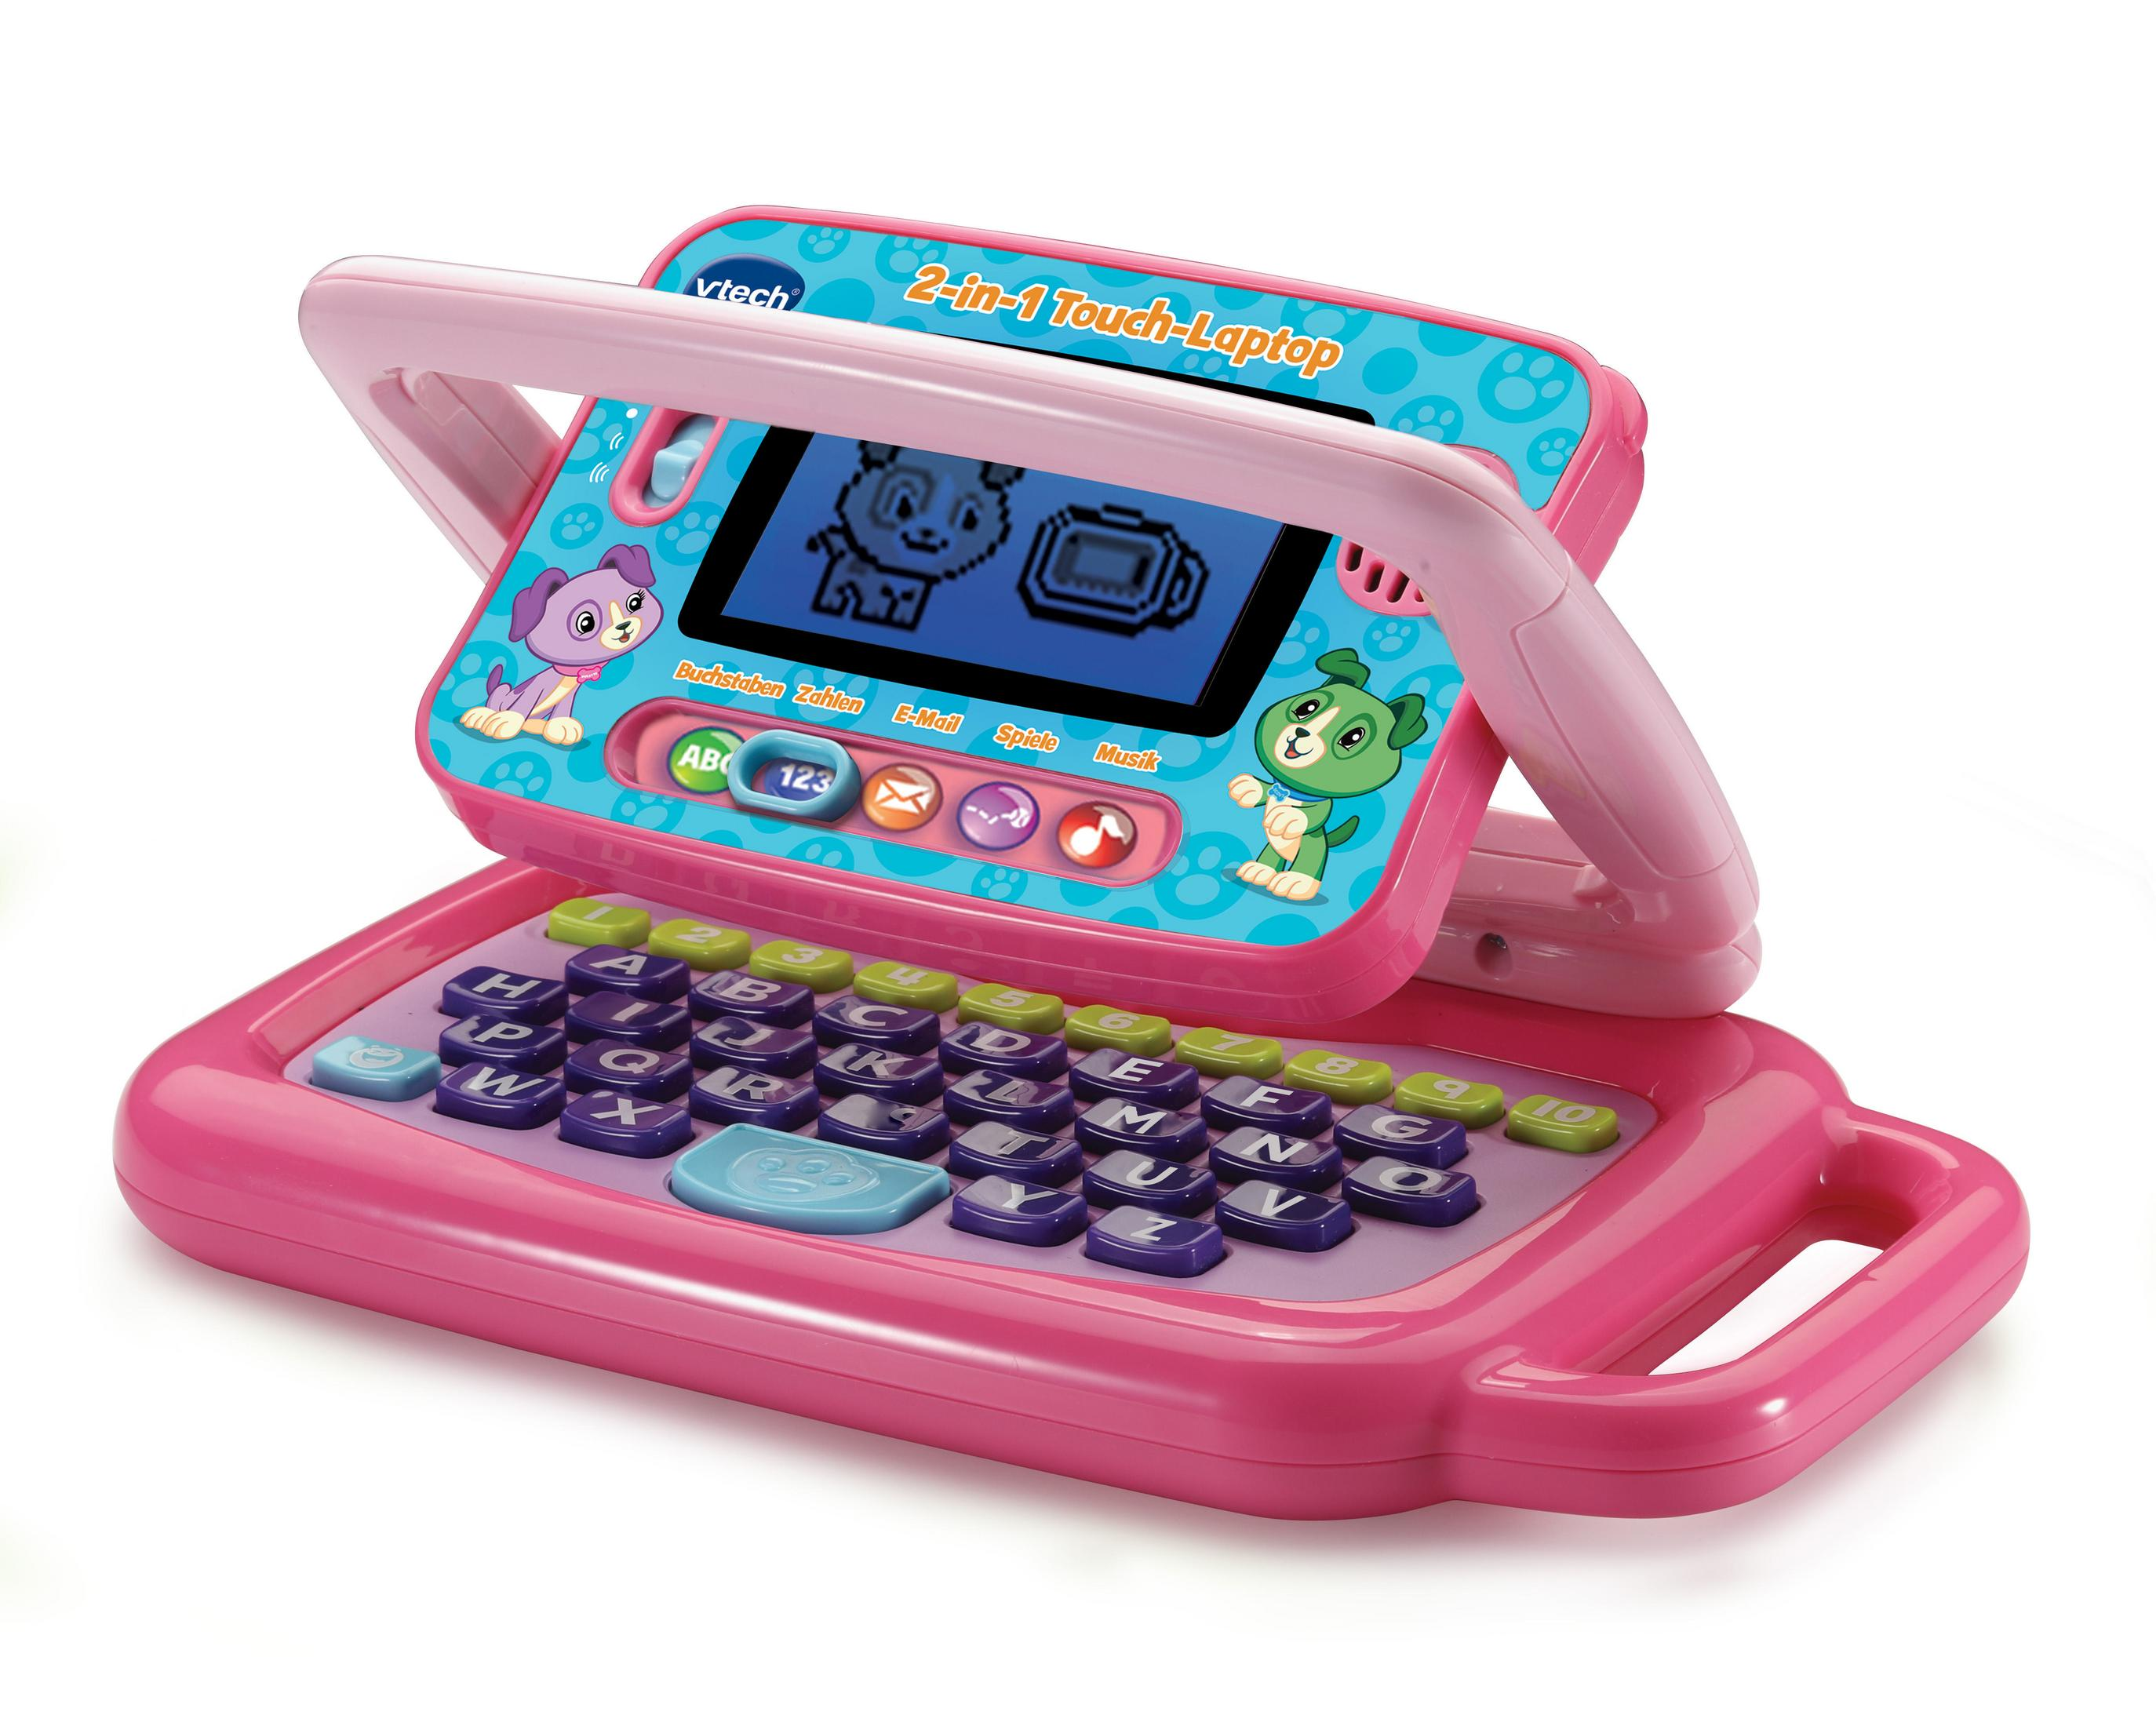 VTECH 80-600954 2-IN-1 Lernlaptop, PINK Mehrfarbig TOUCH-LAPTOP